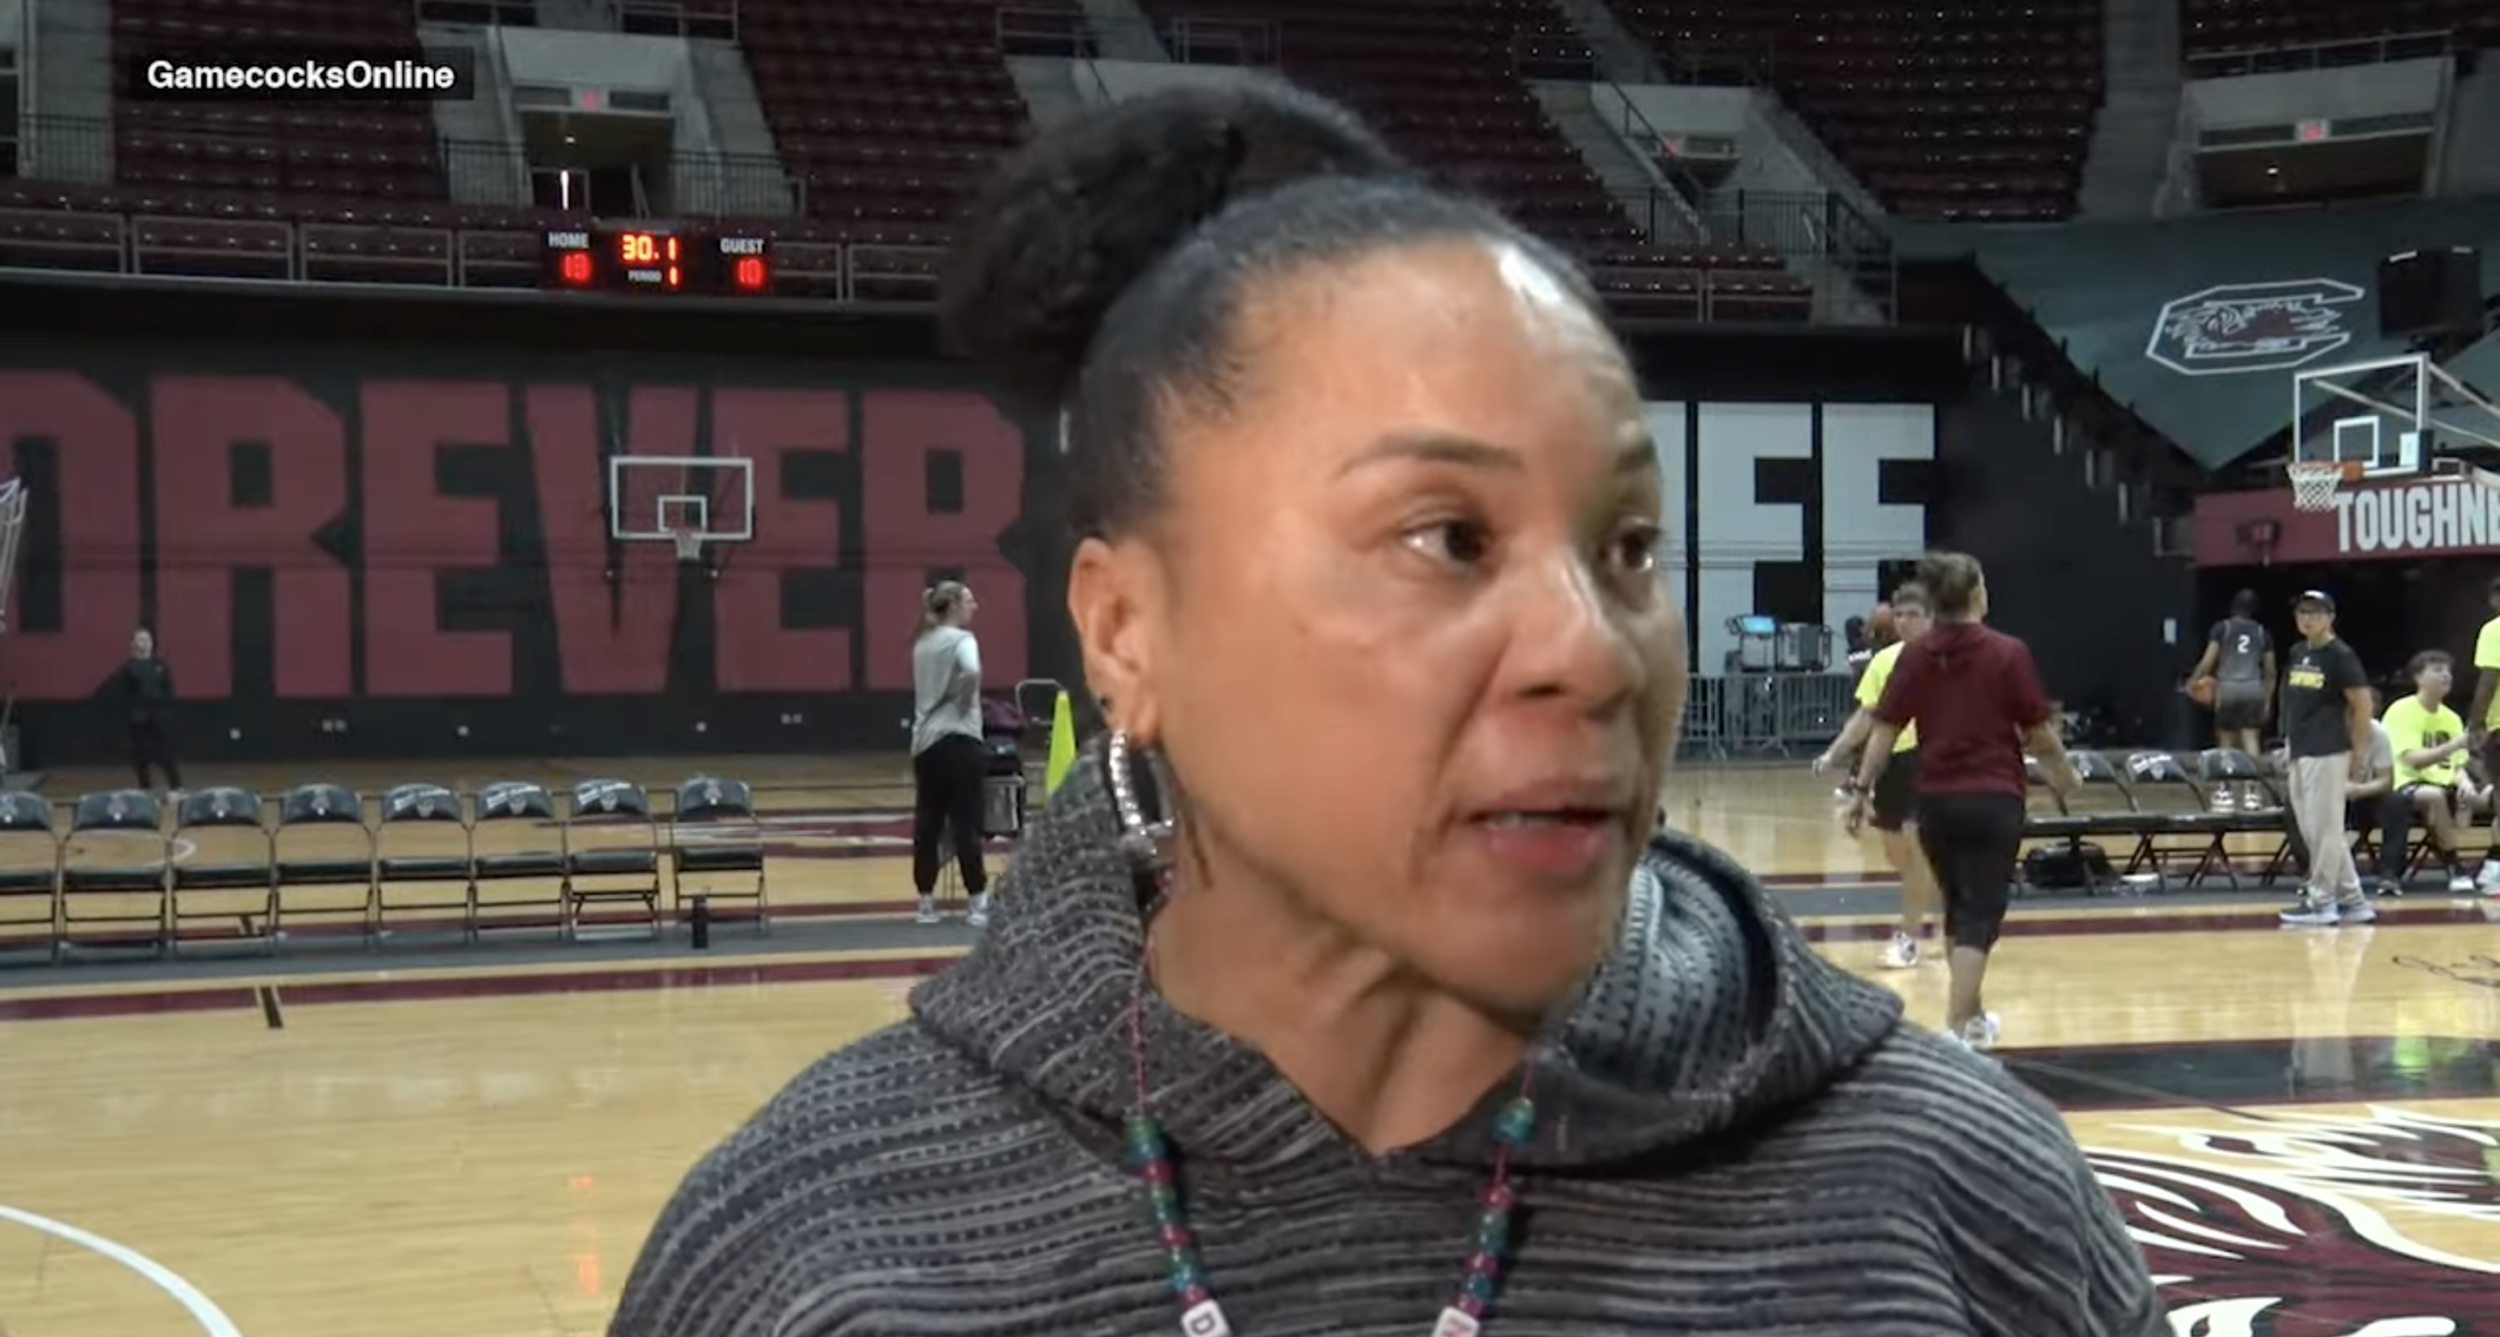 WBB: Dawn Staley News Conference